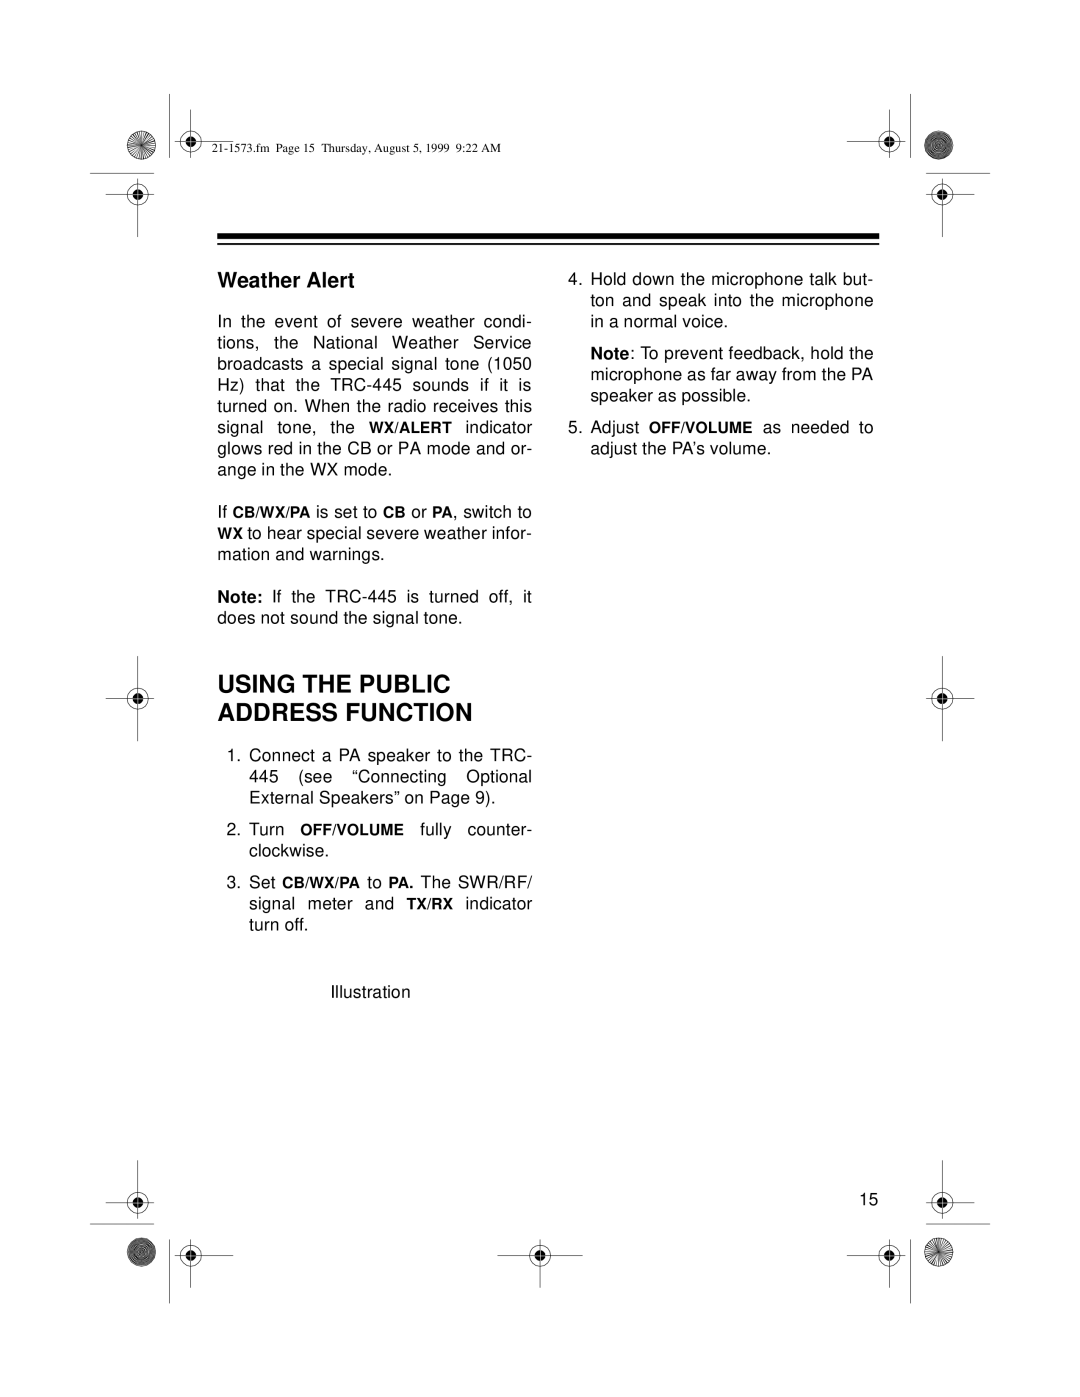 Samsung TRC-445 owner manual Using The Public Address Function, Weather Alert 